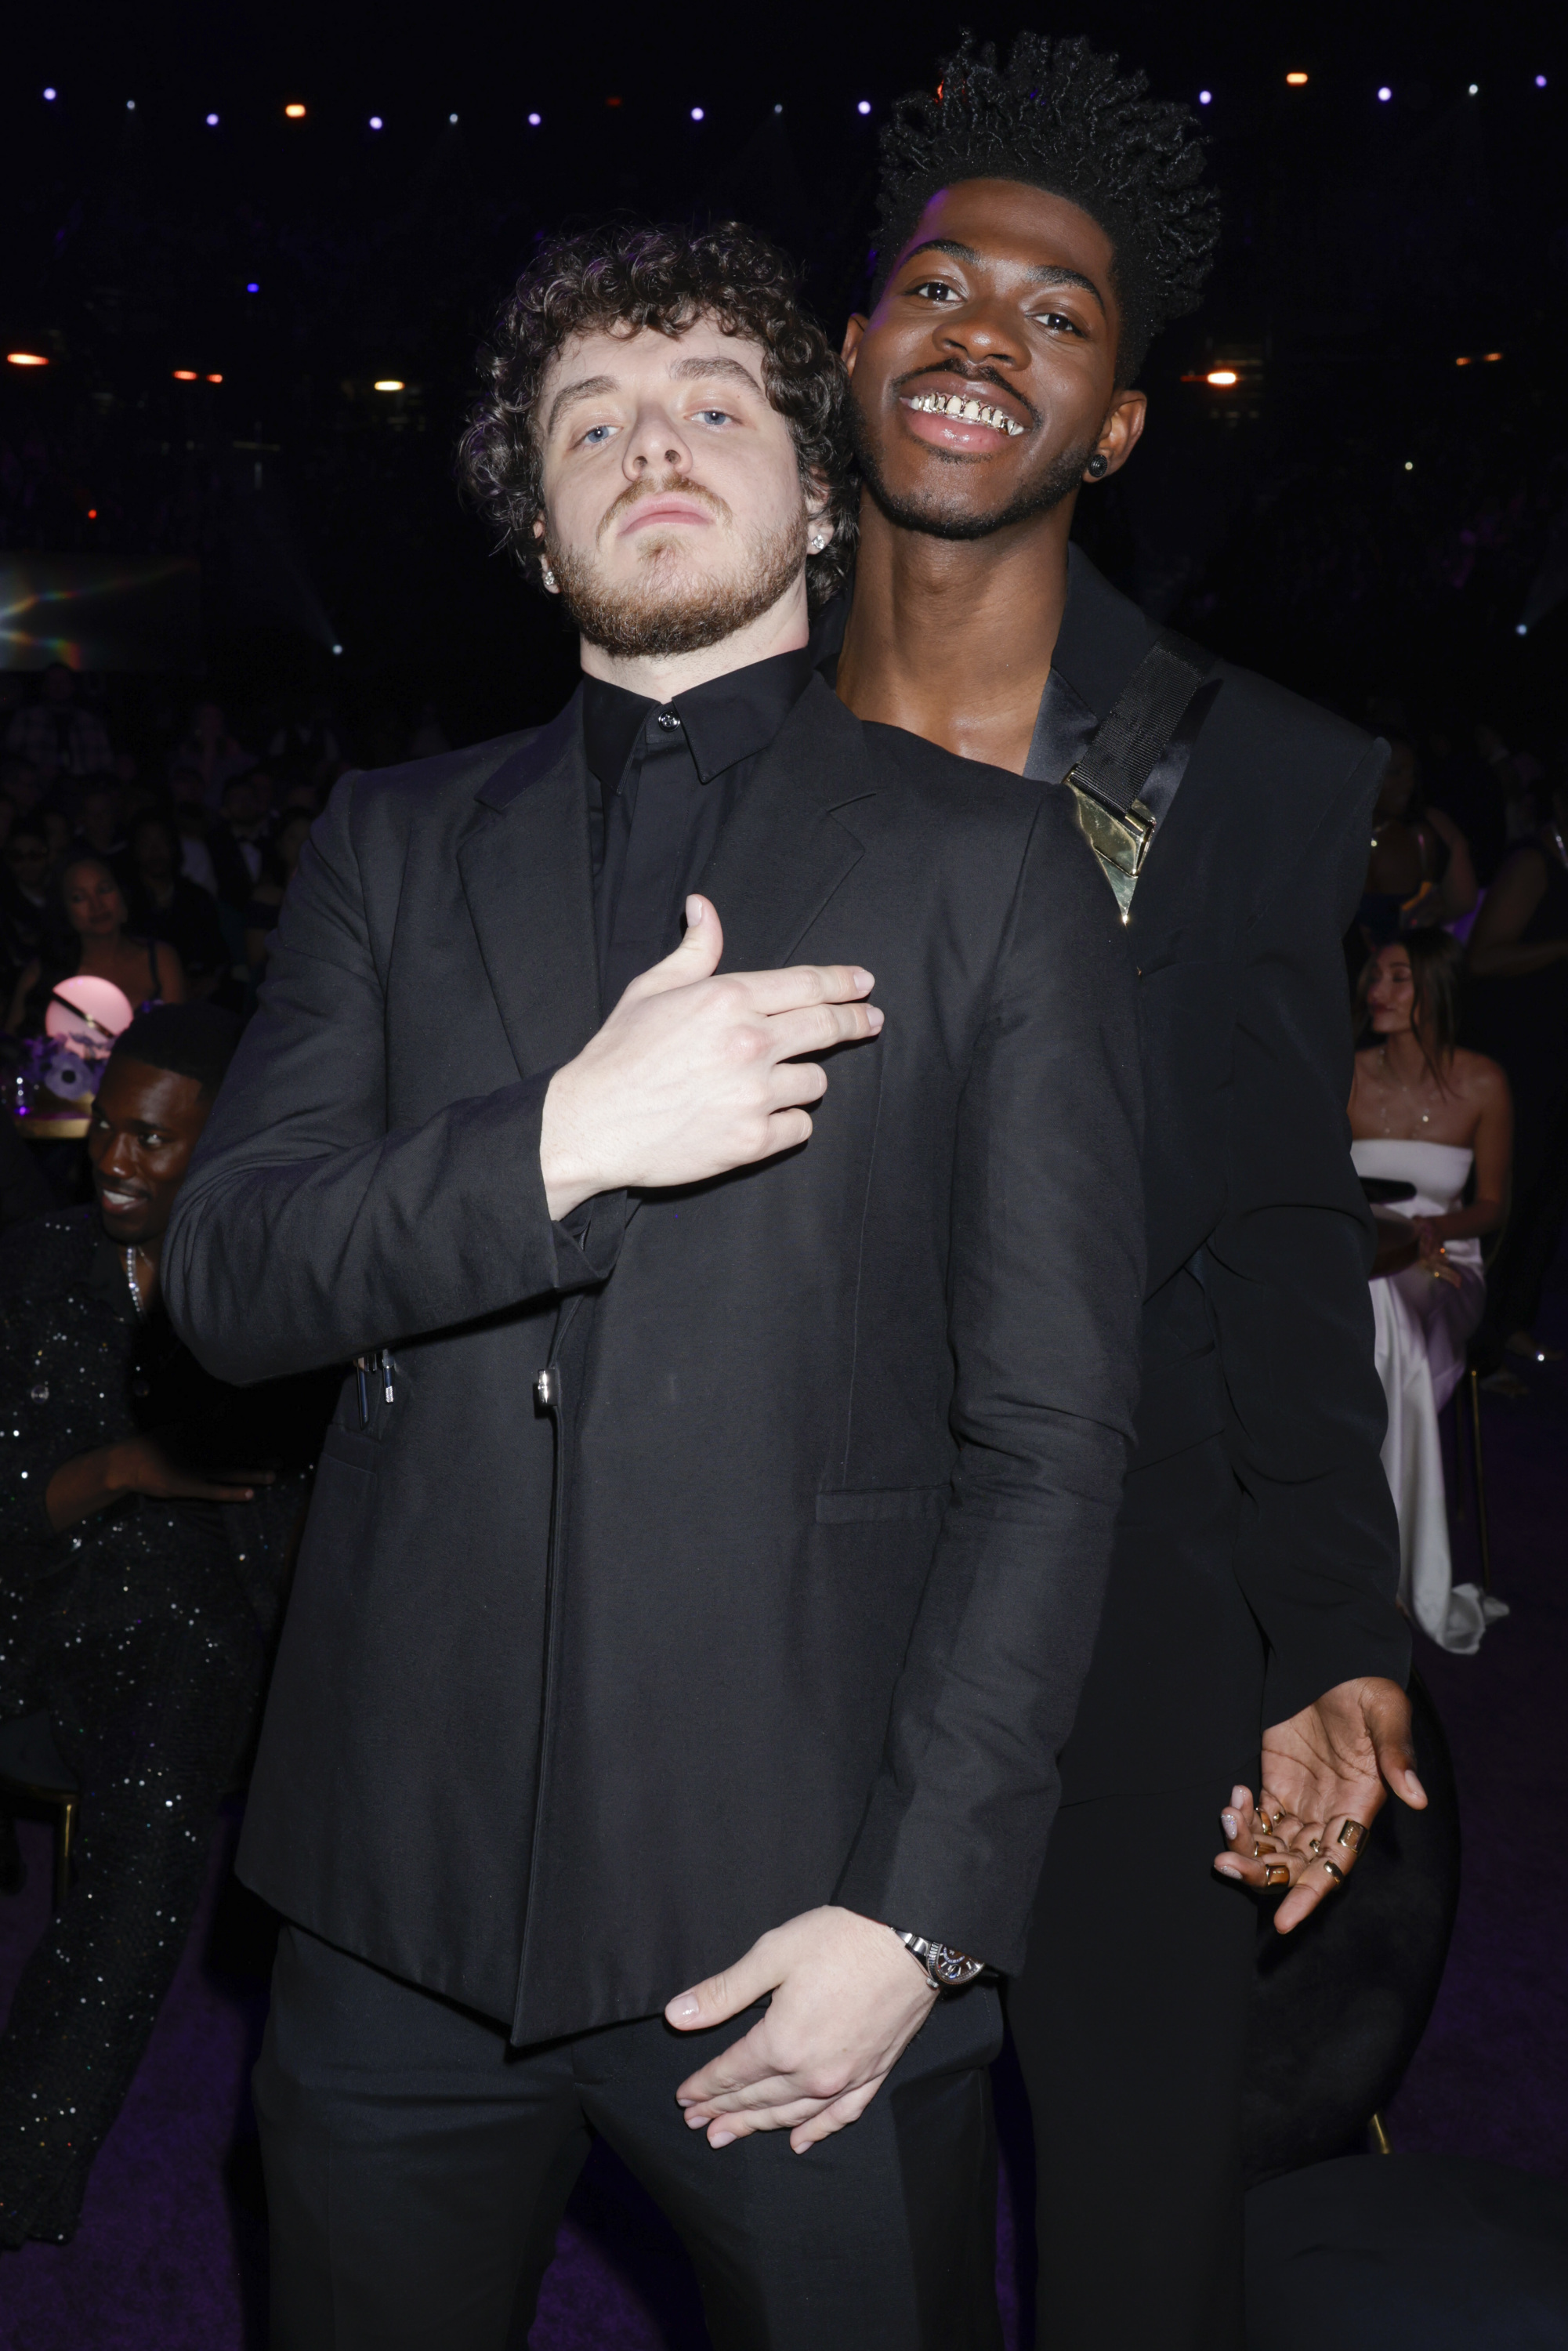 Jack Harlow and Lil Nas X at the 64TH annual Grammy Awards on Sunday, April 3, 2022. | Source: Getty Images